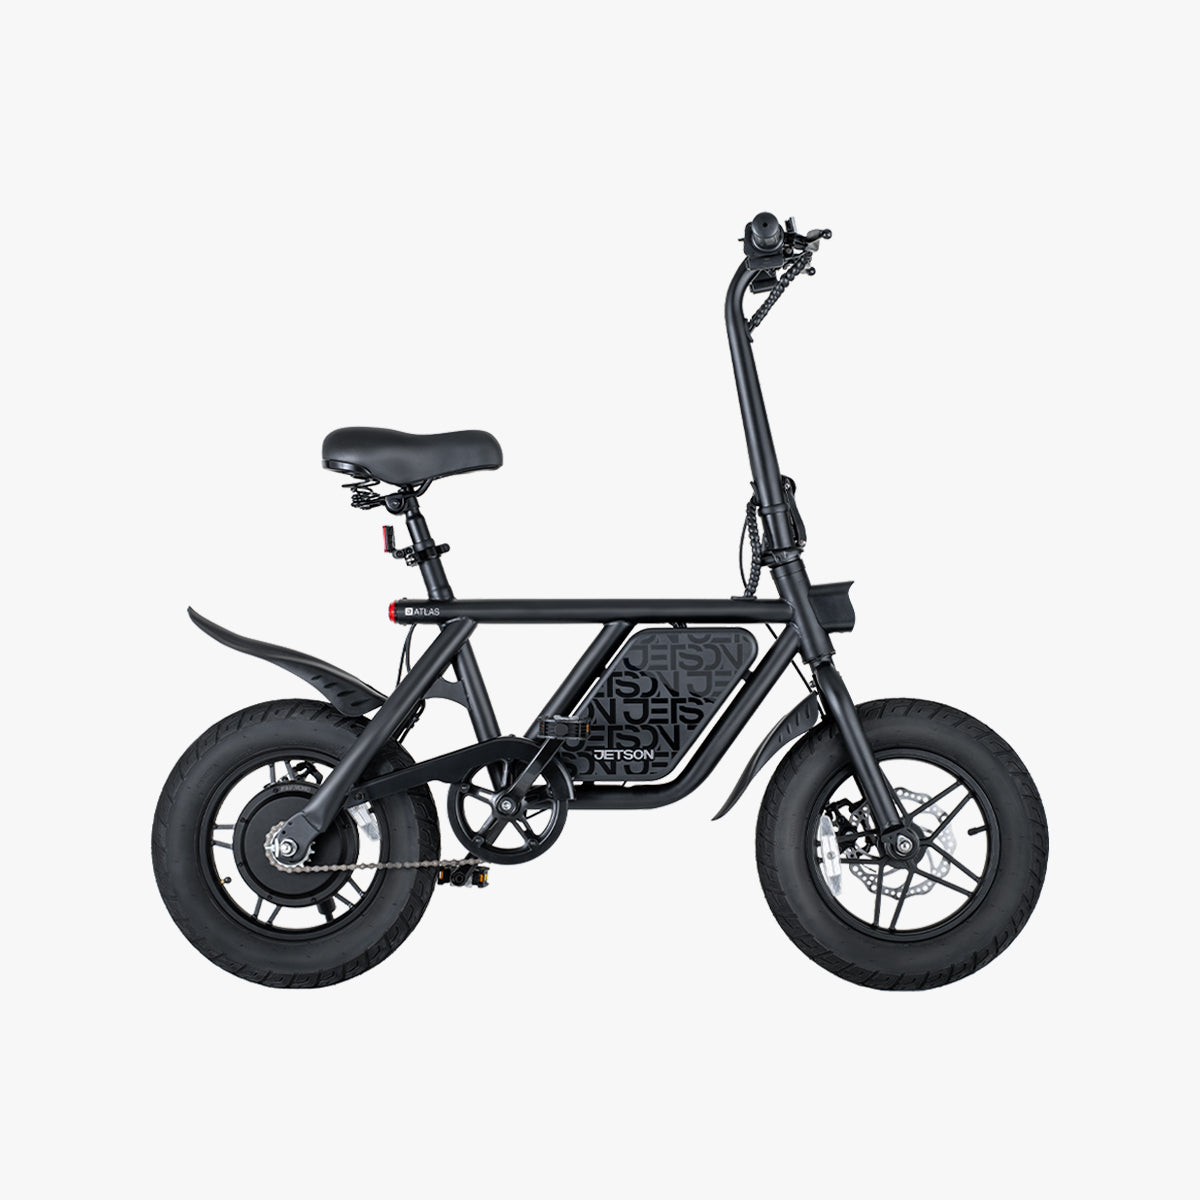 side view of the Atlas bike facing to the right 